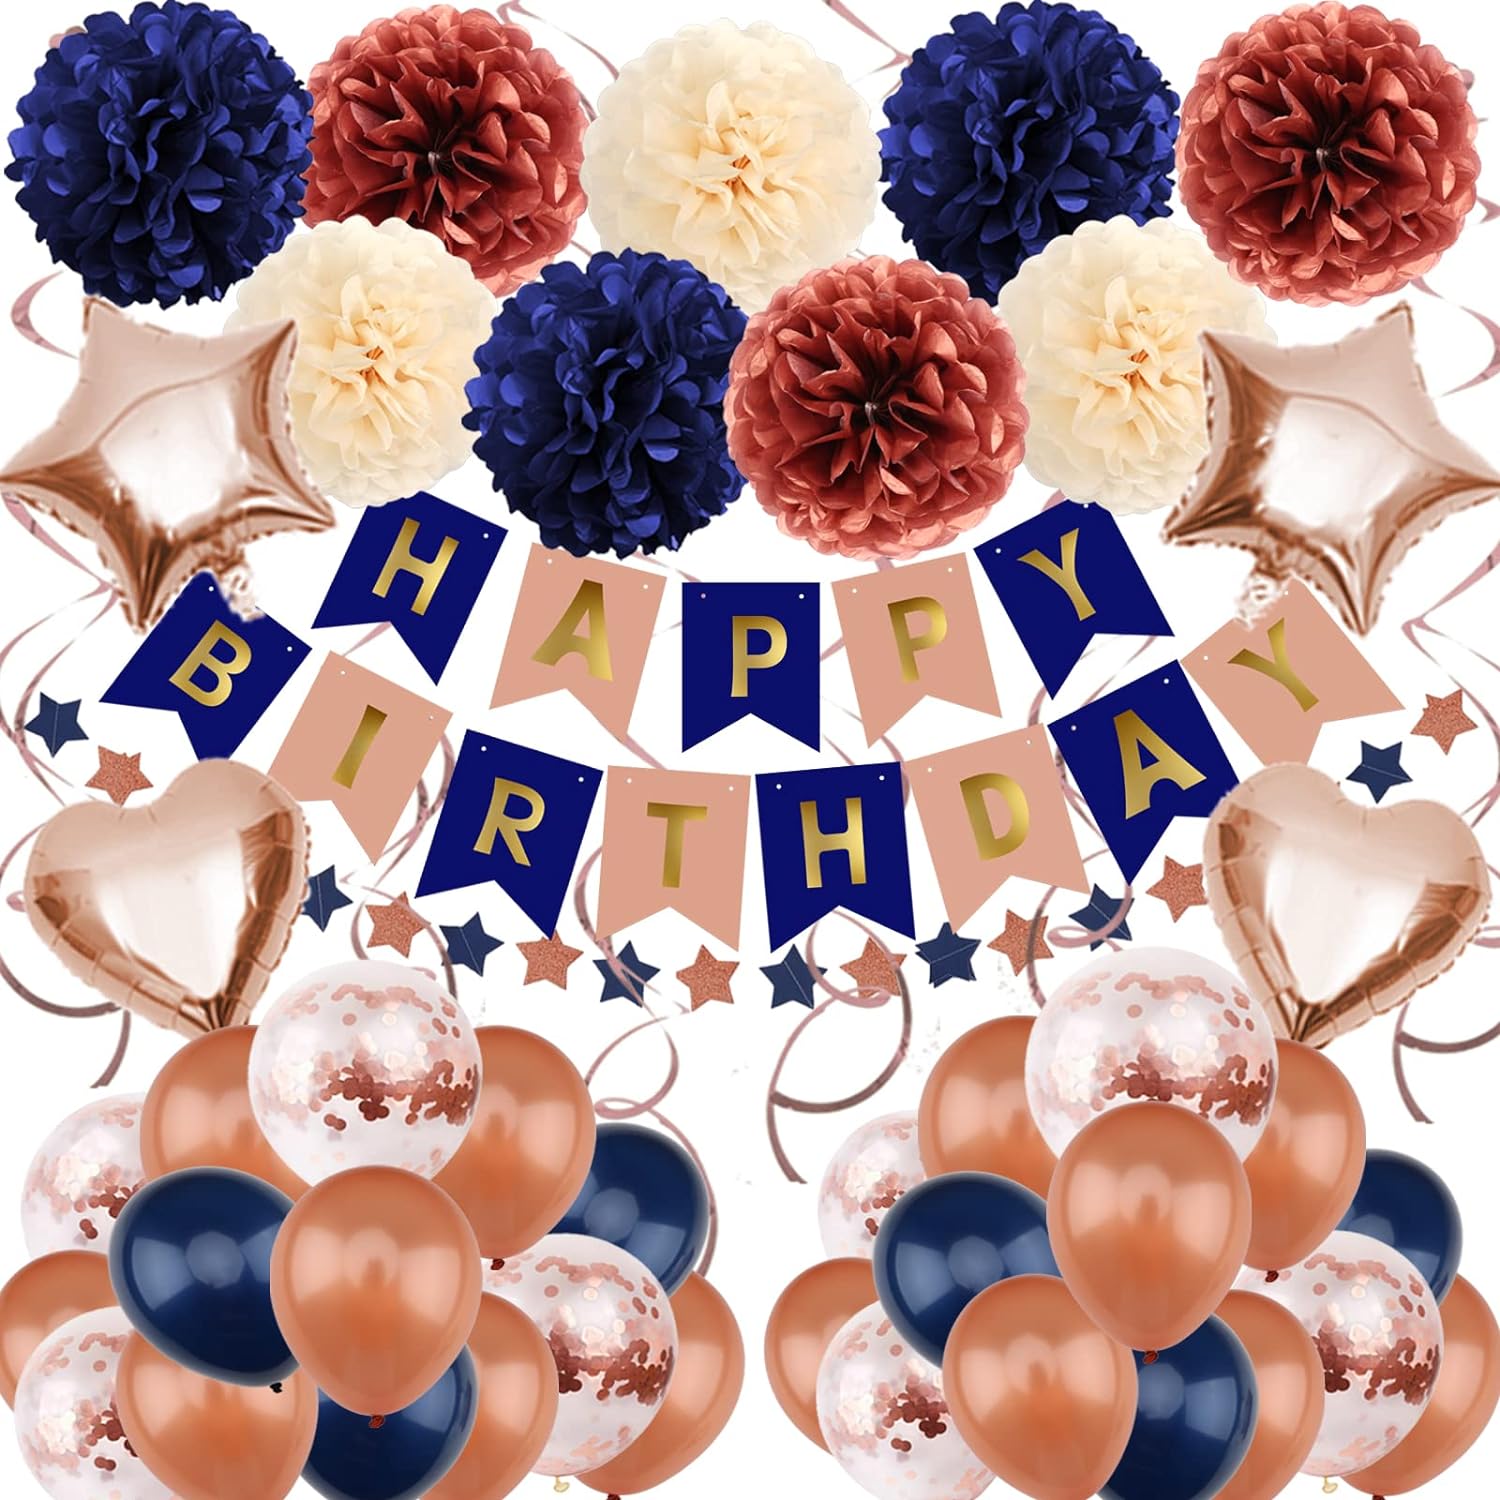 ZERODECO Birthday Decorations for Women, Navy Blue Rose Gold Birthday Party Decorations Happy Birthday Banner Paper Pompoms Balloon for Boys Girls Men Women Birthday Party Decorations Supplies